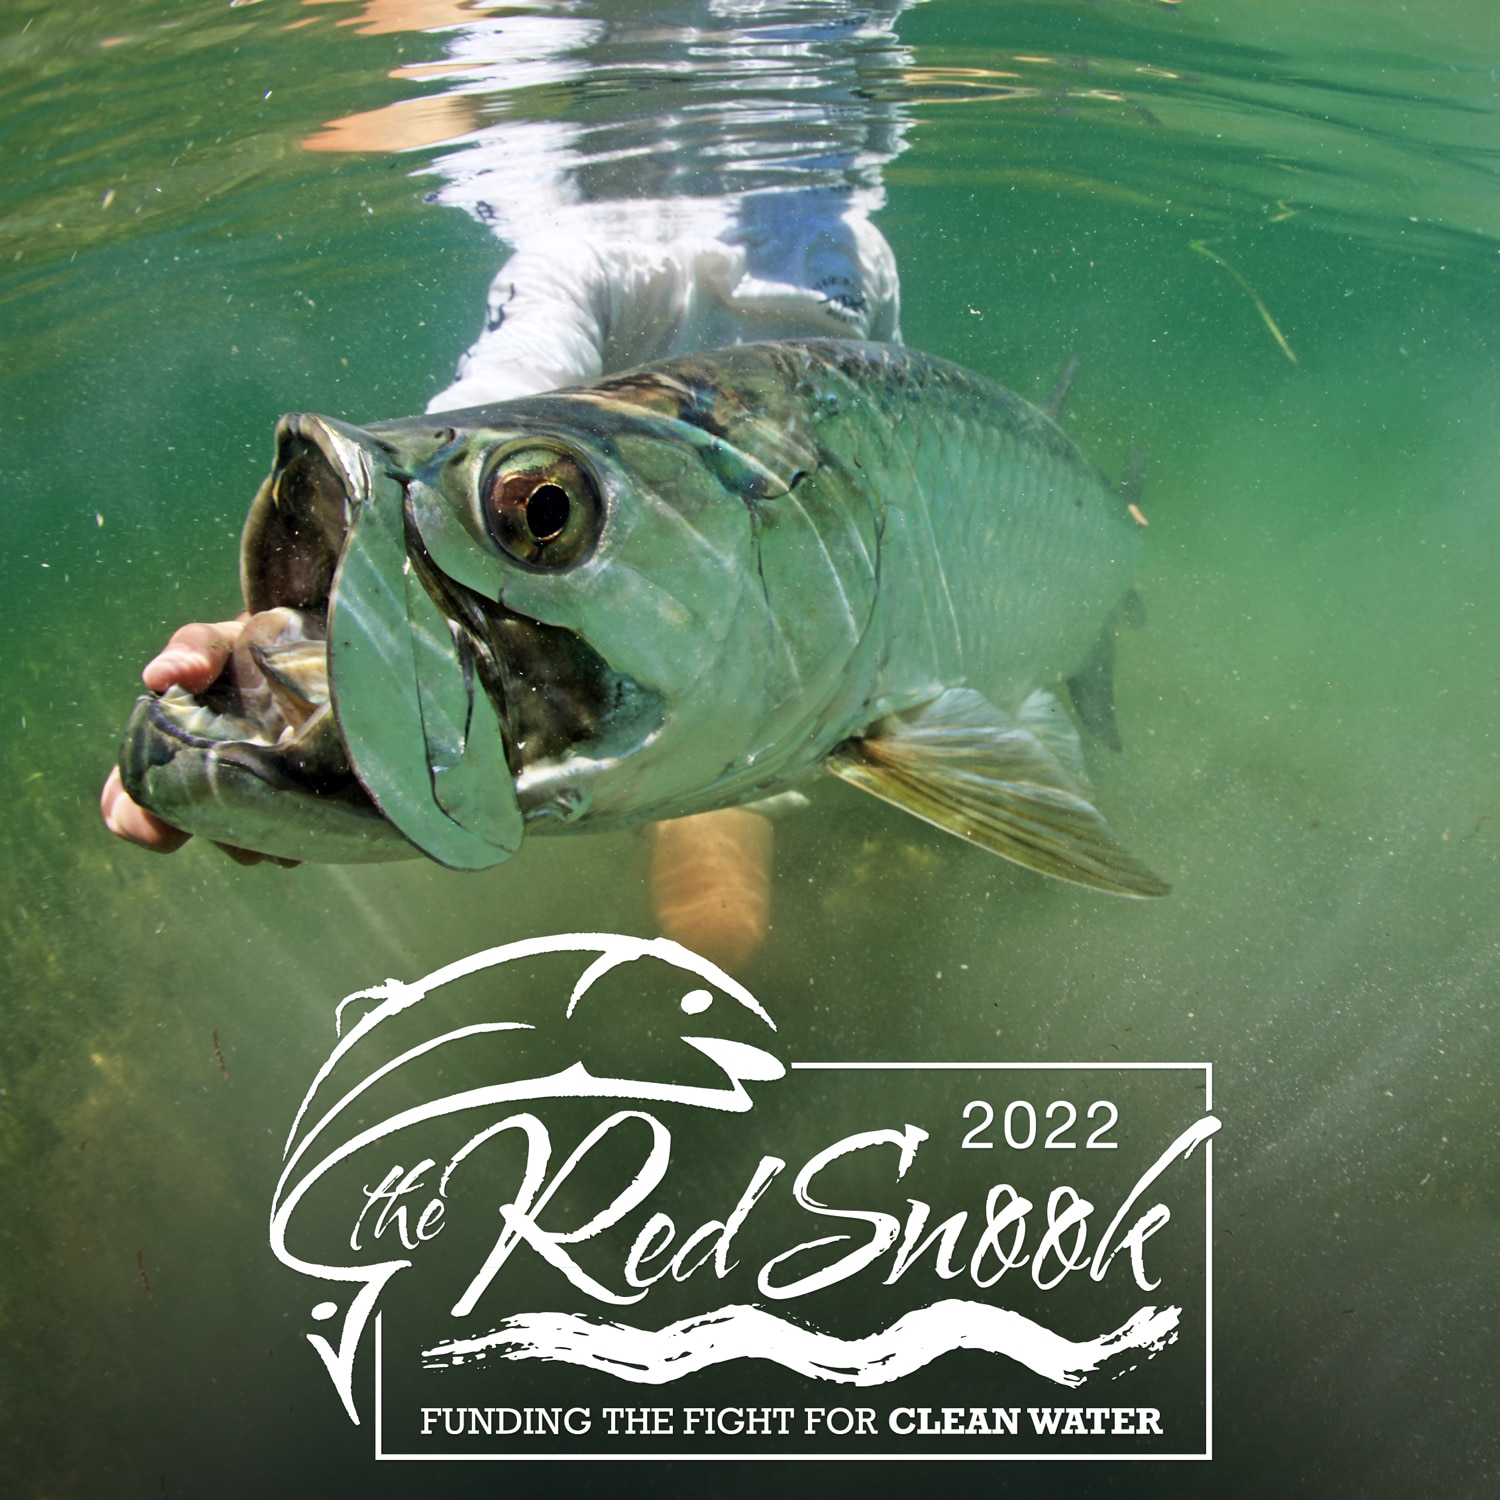 Man holding a snook underwater. Image has the RedSnook logo on it.